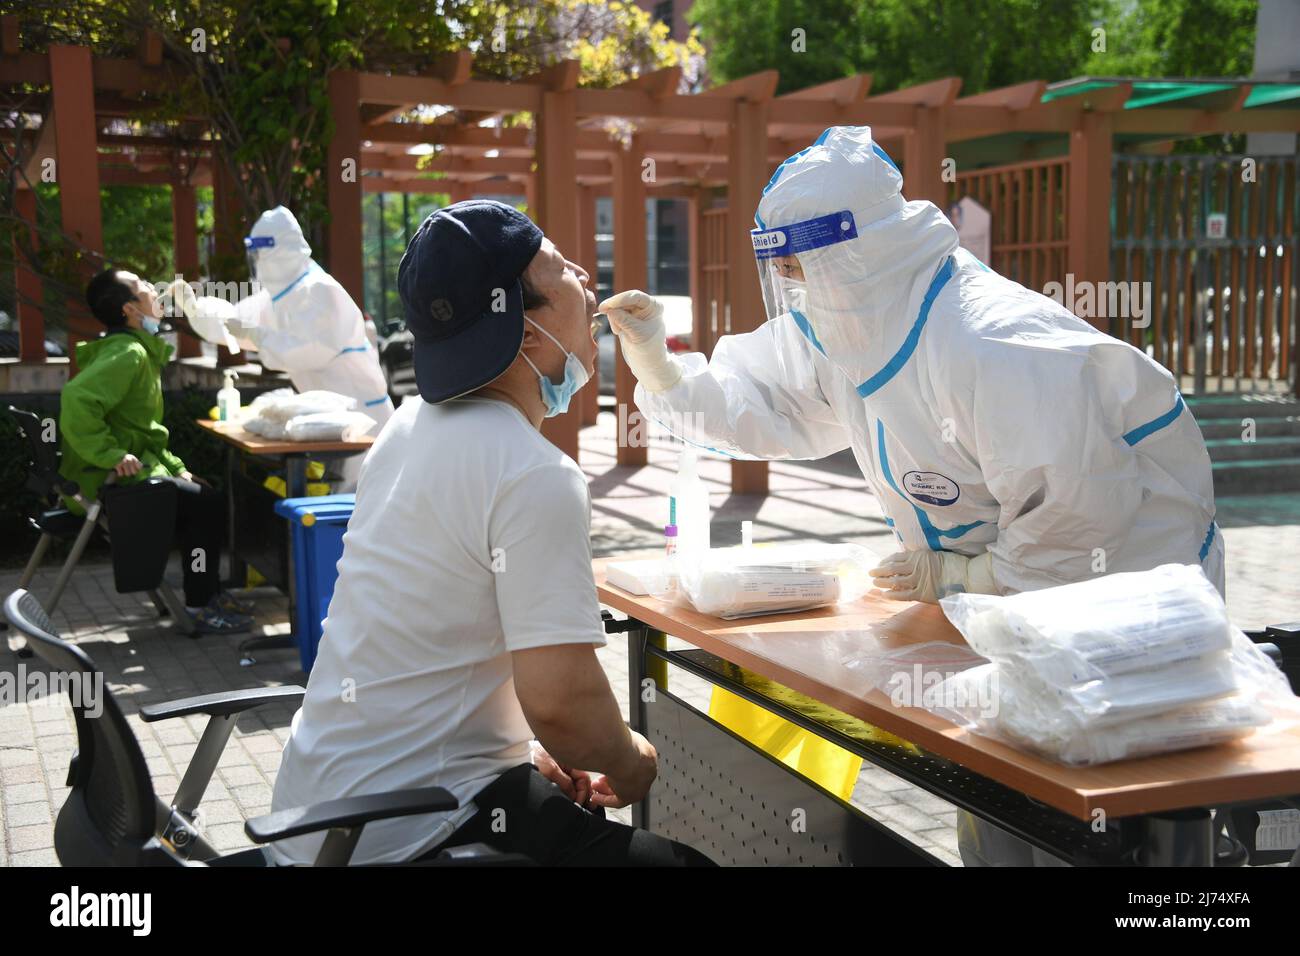 (220506) -- BEIJING, May 6, 2022 (Xinhua) -- A medical worker takes a swab sample from a citizen for nucleic acid test during a mass testing for COVID-19 in Haidian District, Beijing, capital of China, April 26, 2022. (Xinhua/Ren Chao) Stock Photo